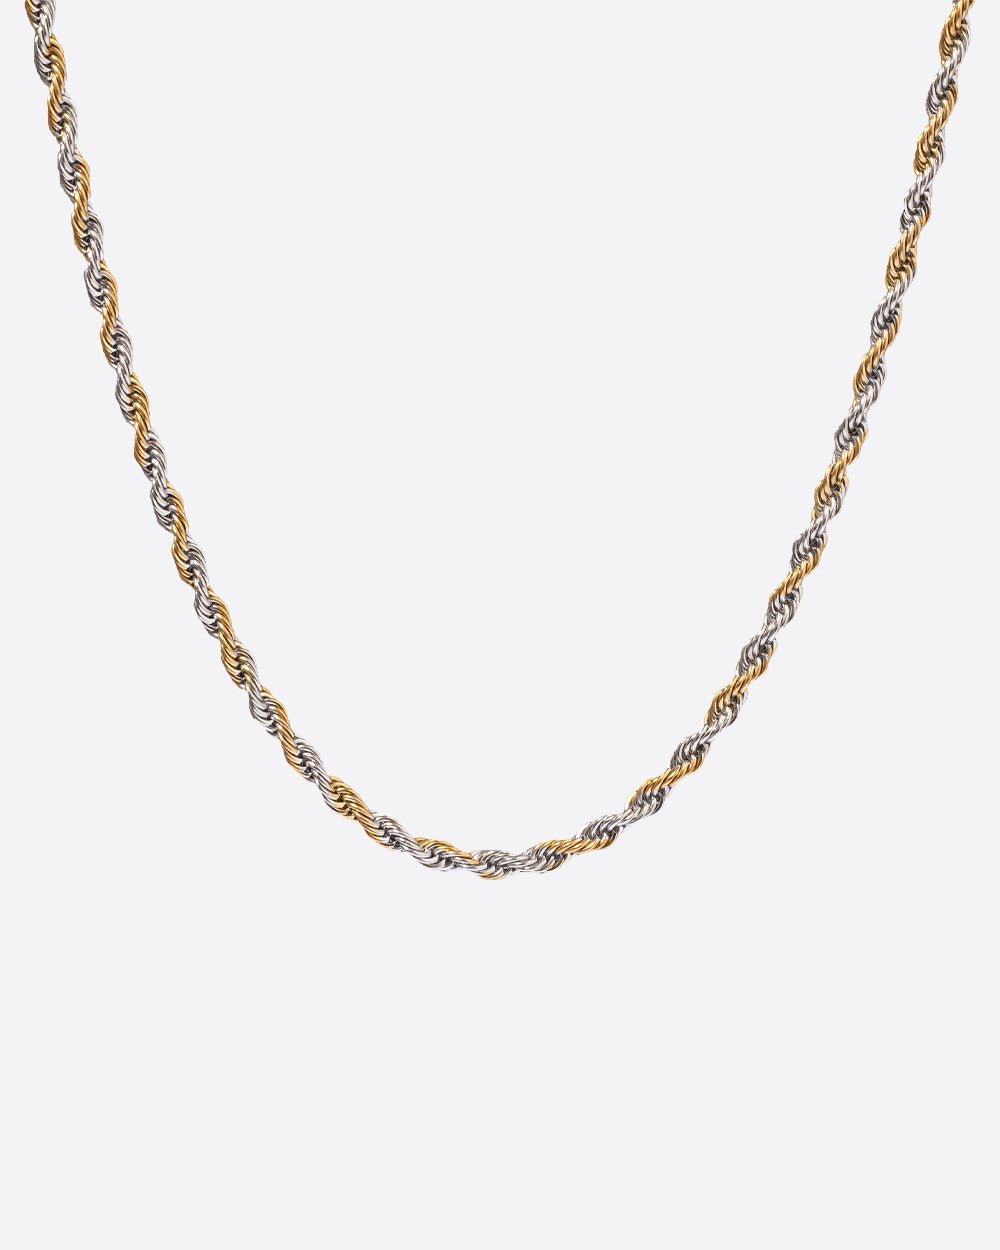 MIXED CLEAN ROPE CHAIN. - 18K GOLD - Drippy Amsterdam